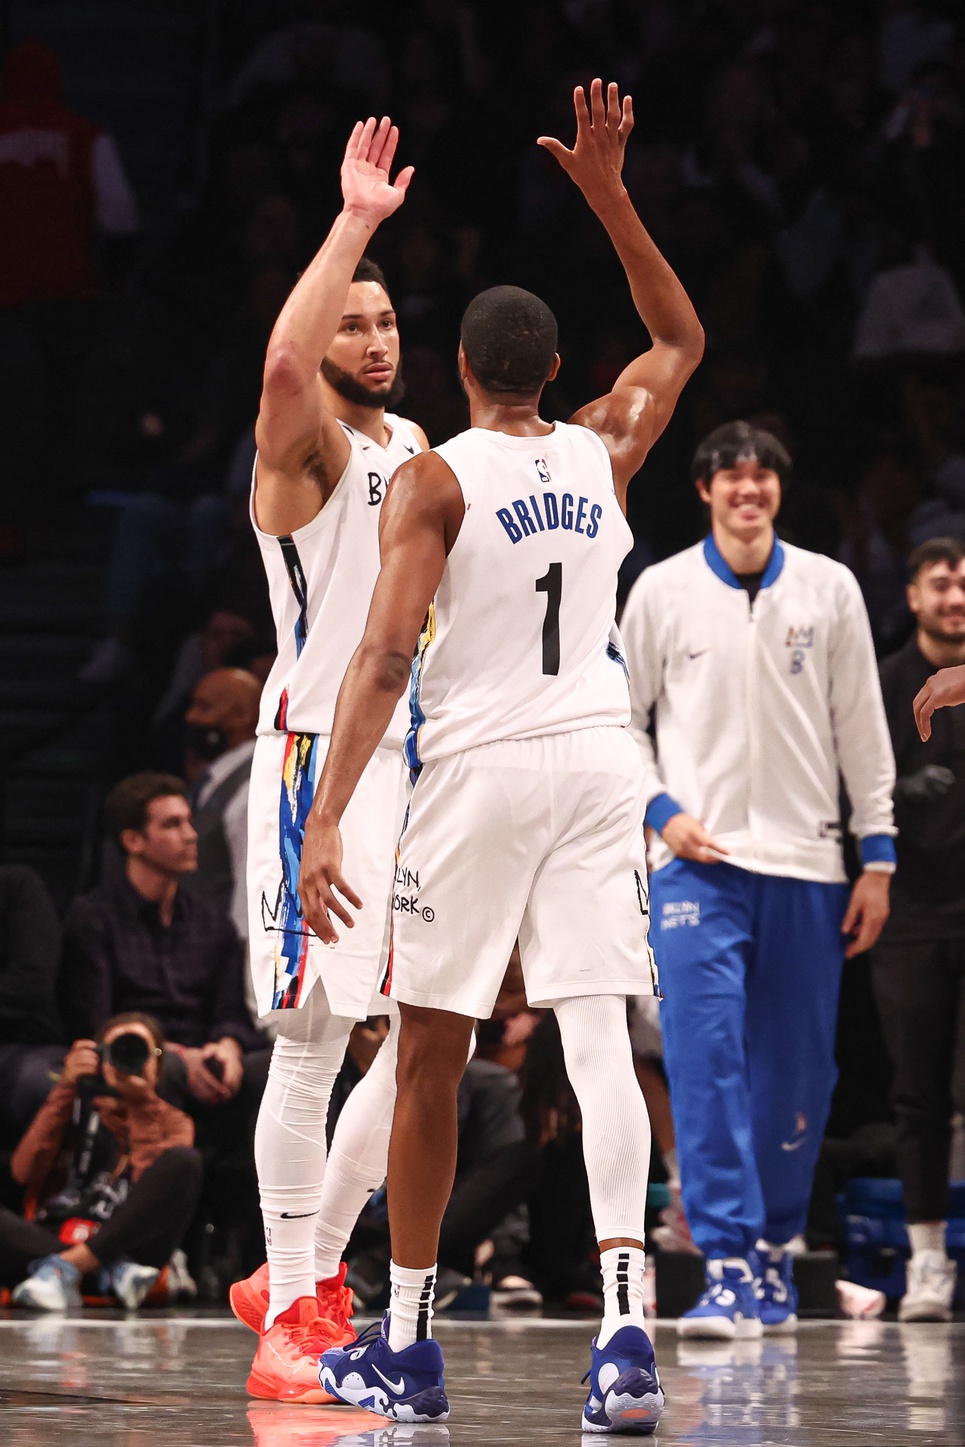 Feb 15, 2023; Brooklyn, New York, USA; Brooklyn Nets guard Ben Simmons (10) high fives forward Mikal Bridges (1) during the second half against the Miami Heat at Barclays Center. Mandatory Credit: Vincent Carchietta-USA TODAY Sports